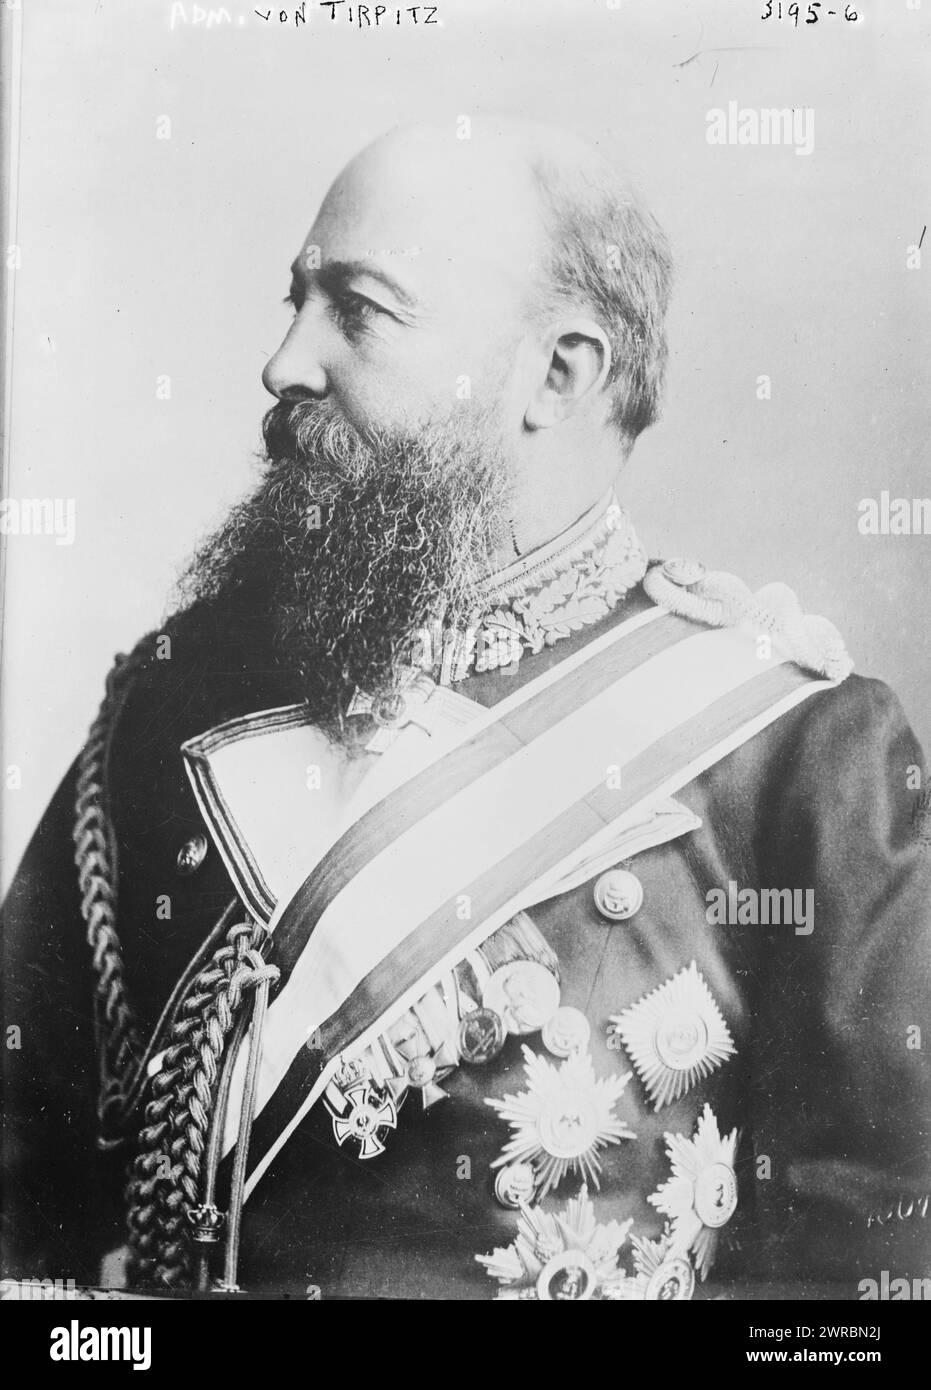 Adm. von Tirpitz, Photograph shows Admiral Alfred von Tirpitz (1849-1930), Secretary of State of the German Imperial Naval Office from 1897-1916., between ca. 1910 and ca. 1915, Glass negatives, 1 negative: glass Stock Photo